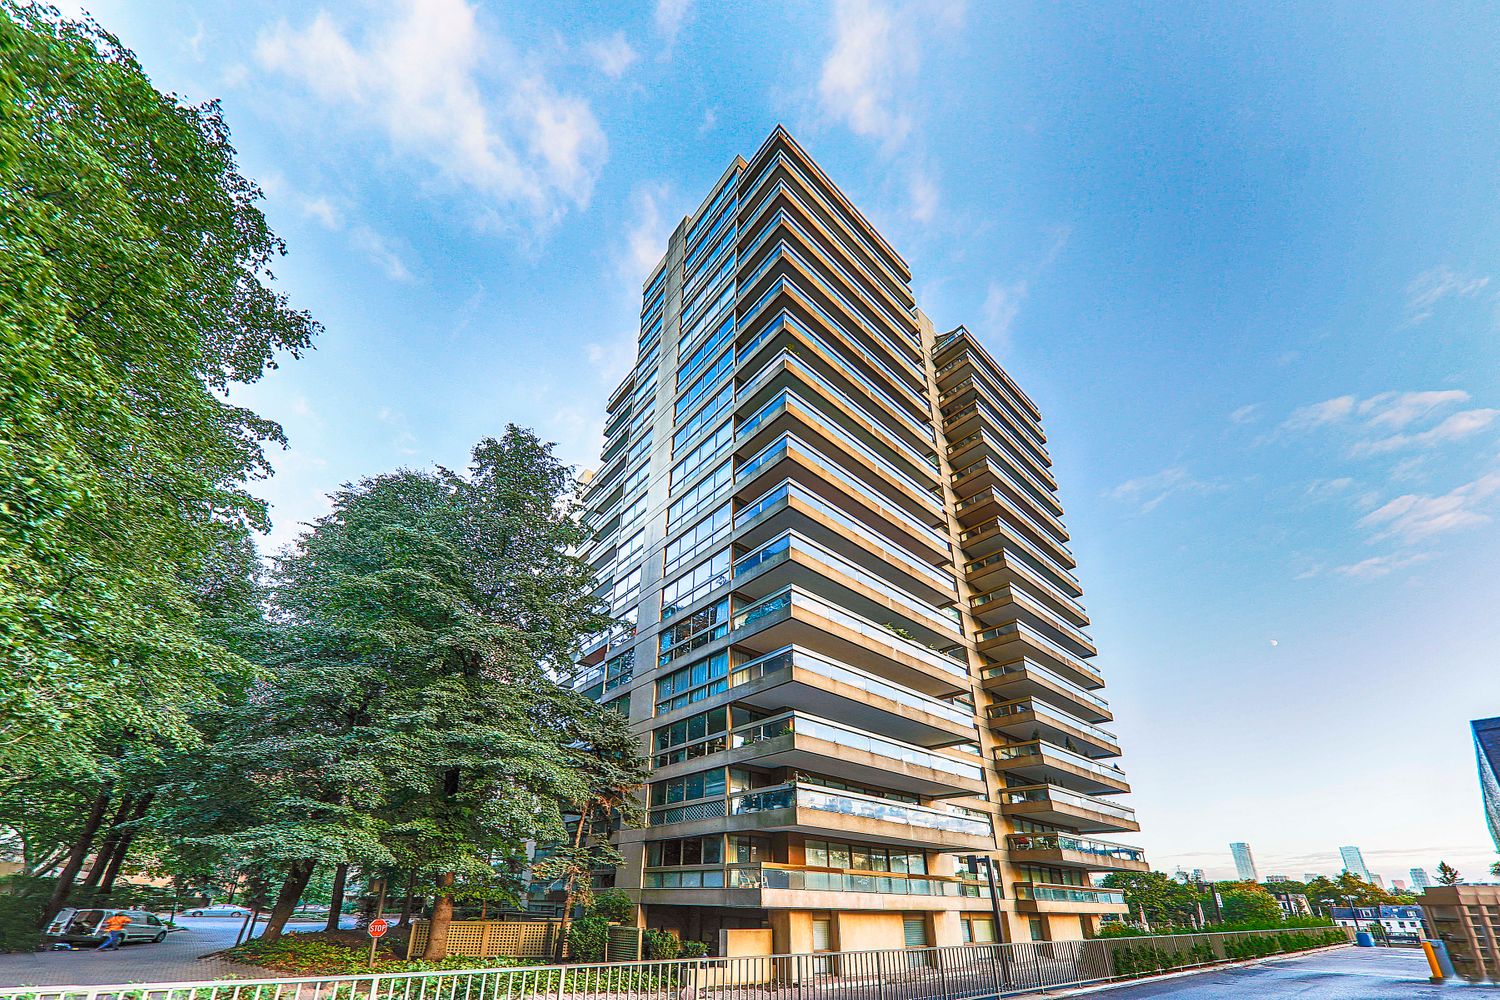 61 St Clair Avenue W. Granite Place is located in  Midtown, Toronto - image #1 of 5